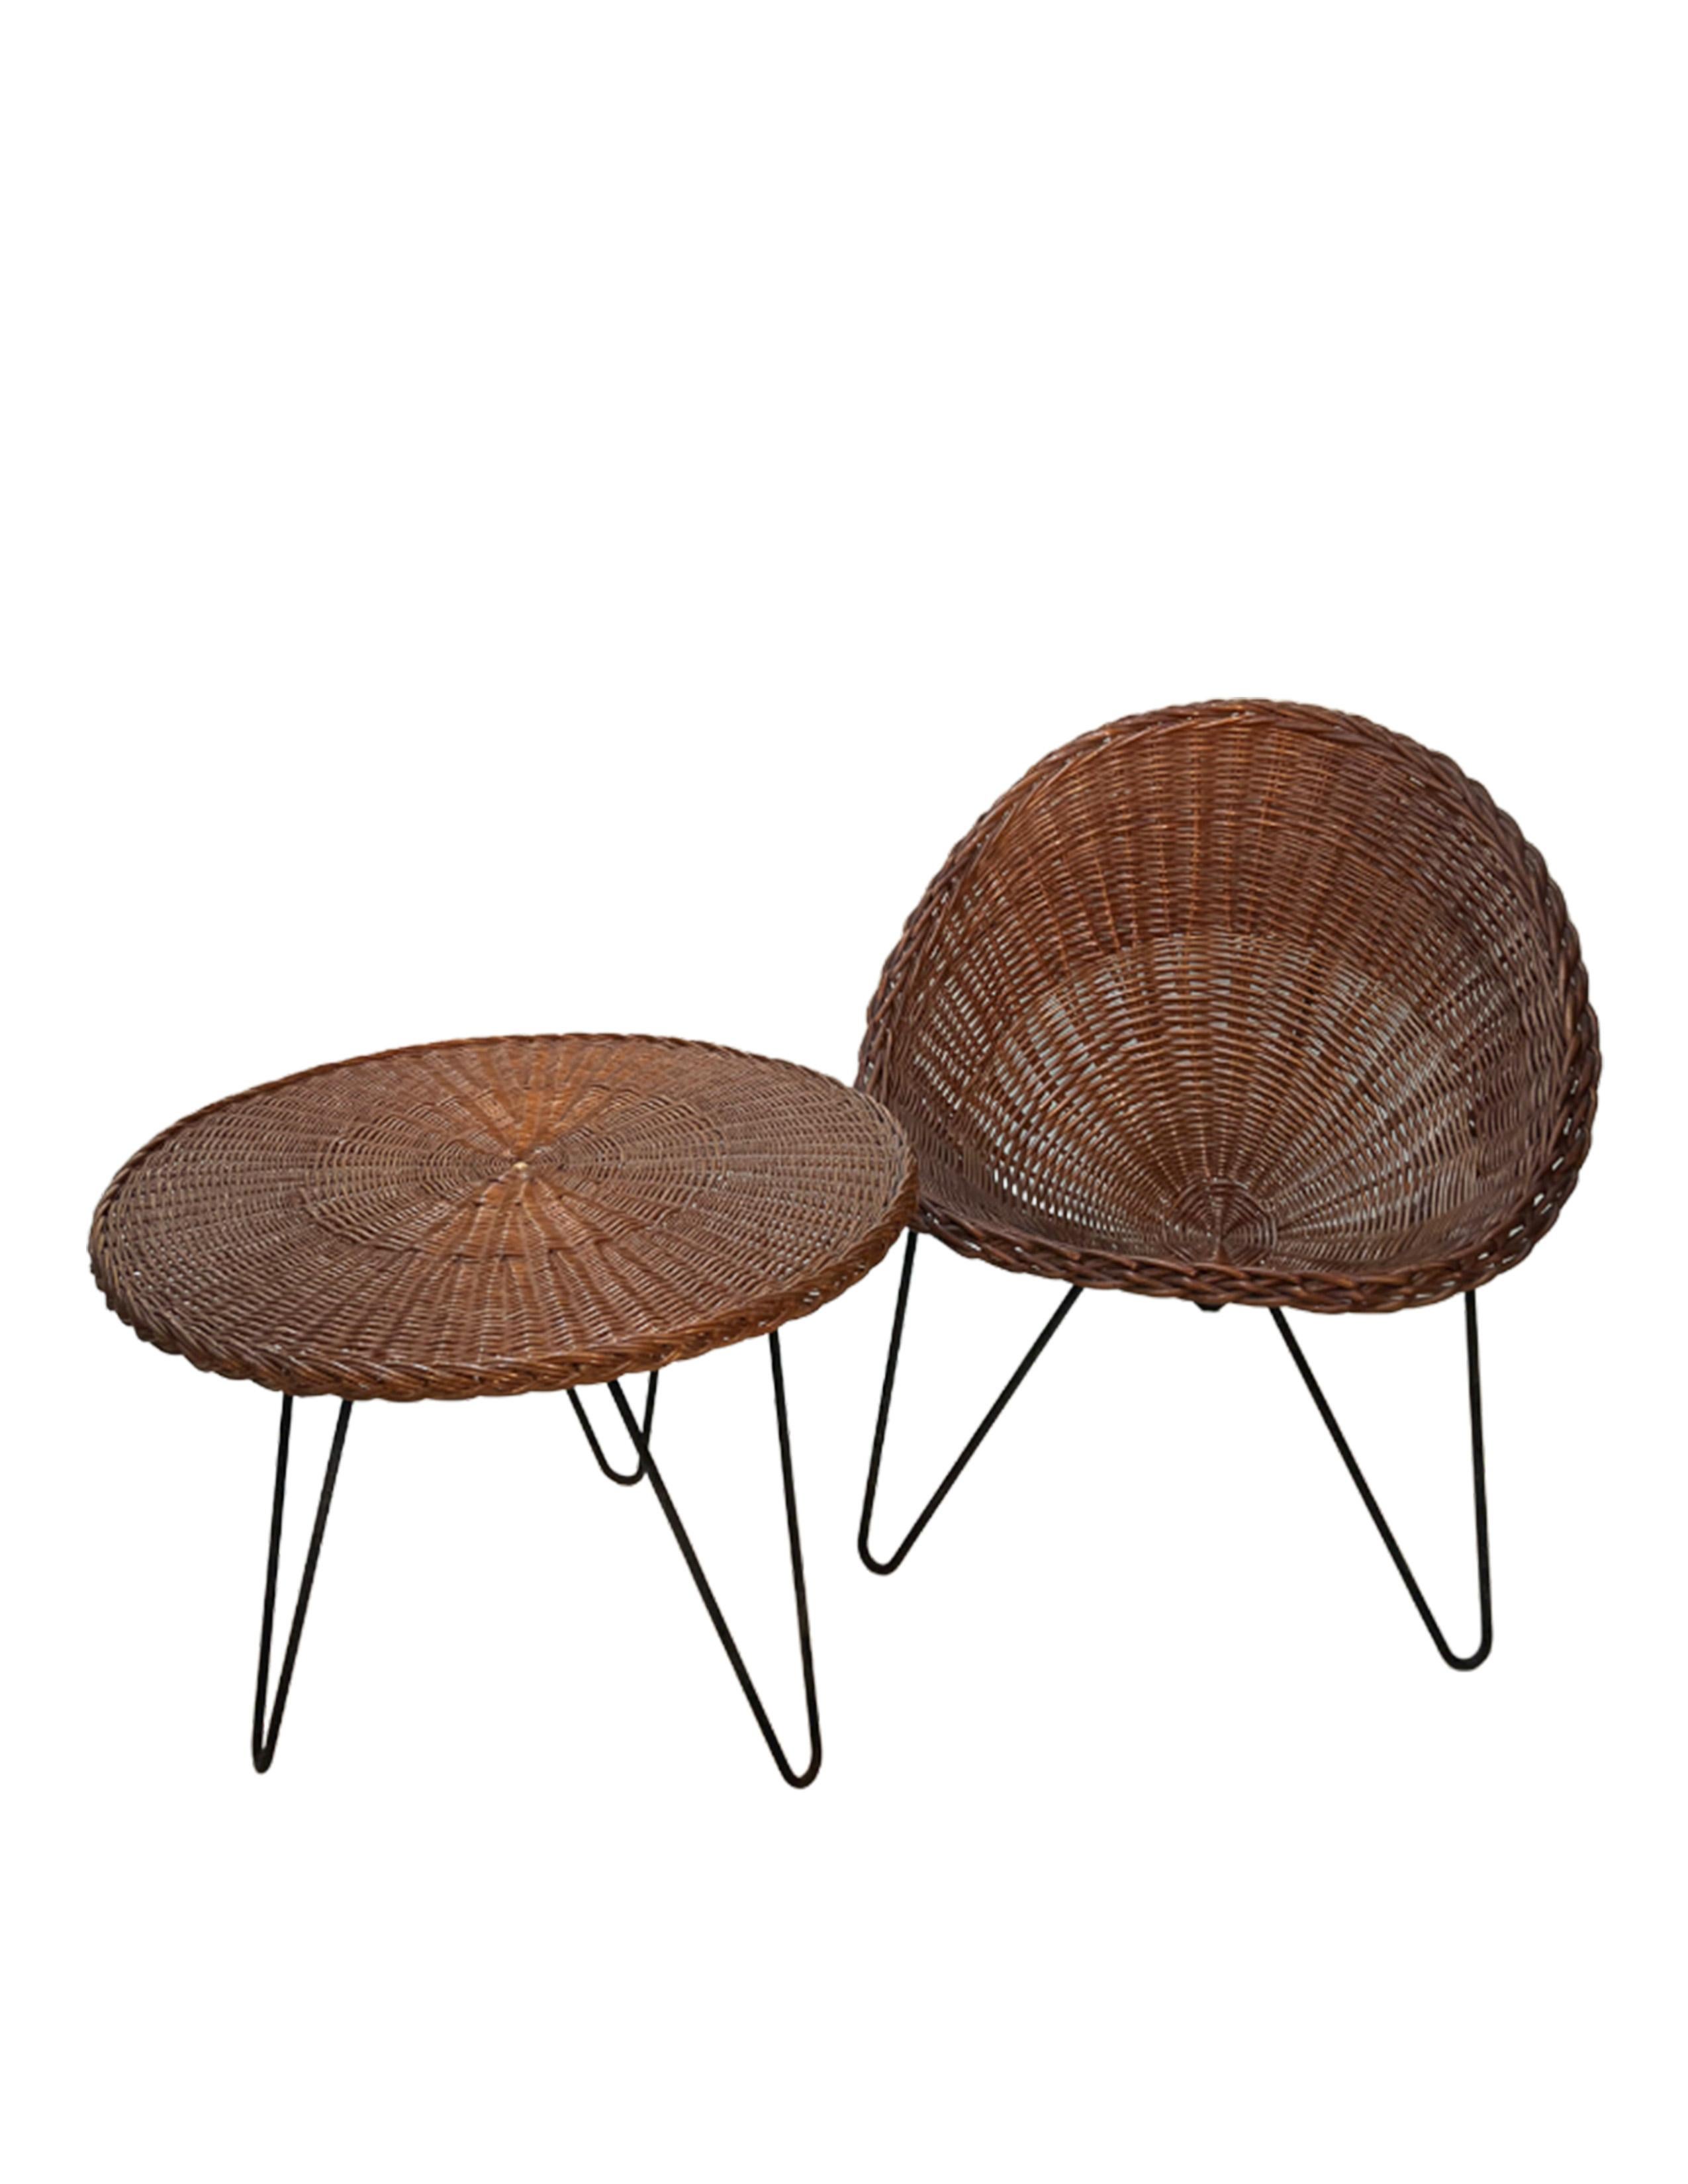 3 piece Mid-Modern Woven Rattan Conical Round Chair Set with Table
The rattan chairs have a black enameled metal frame.
The seat shell was made of rattan with a conical form.
Very good condition.

